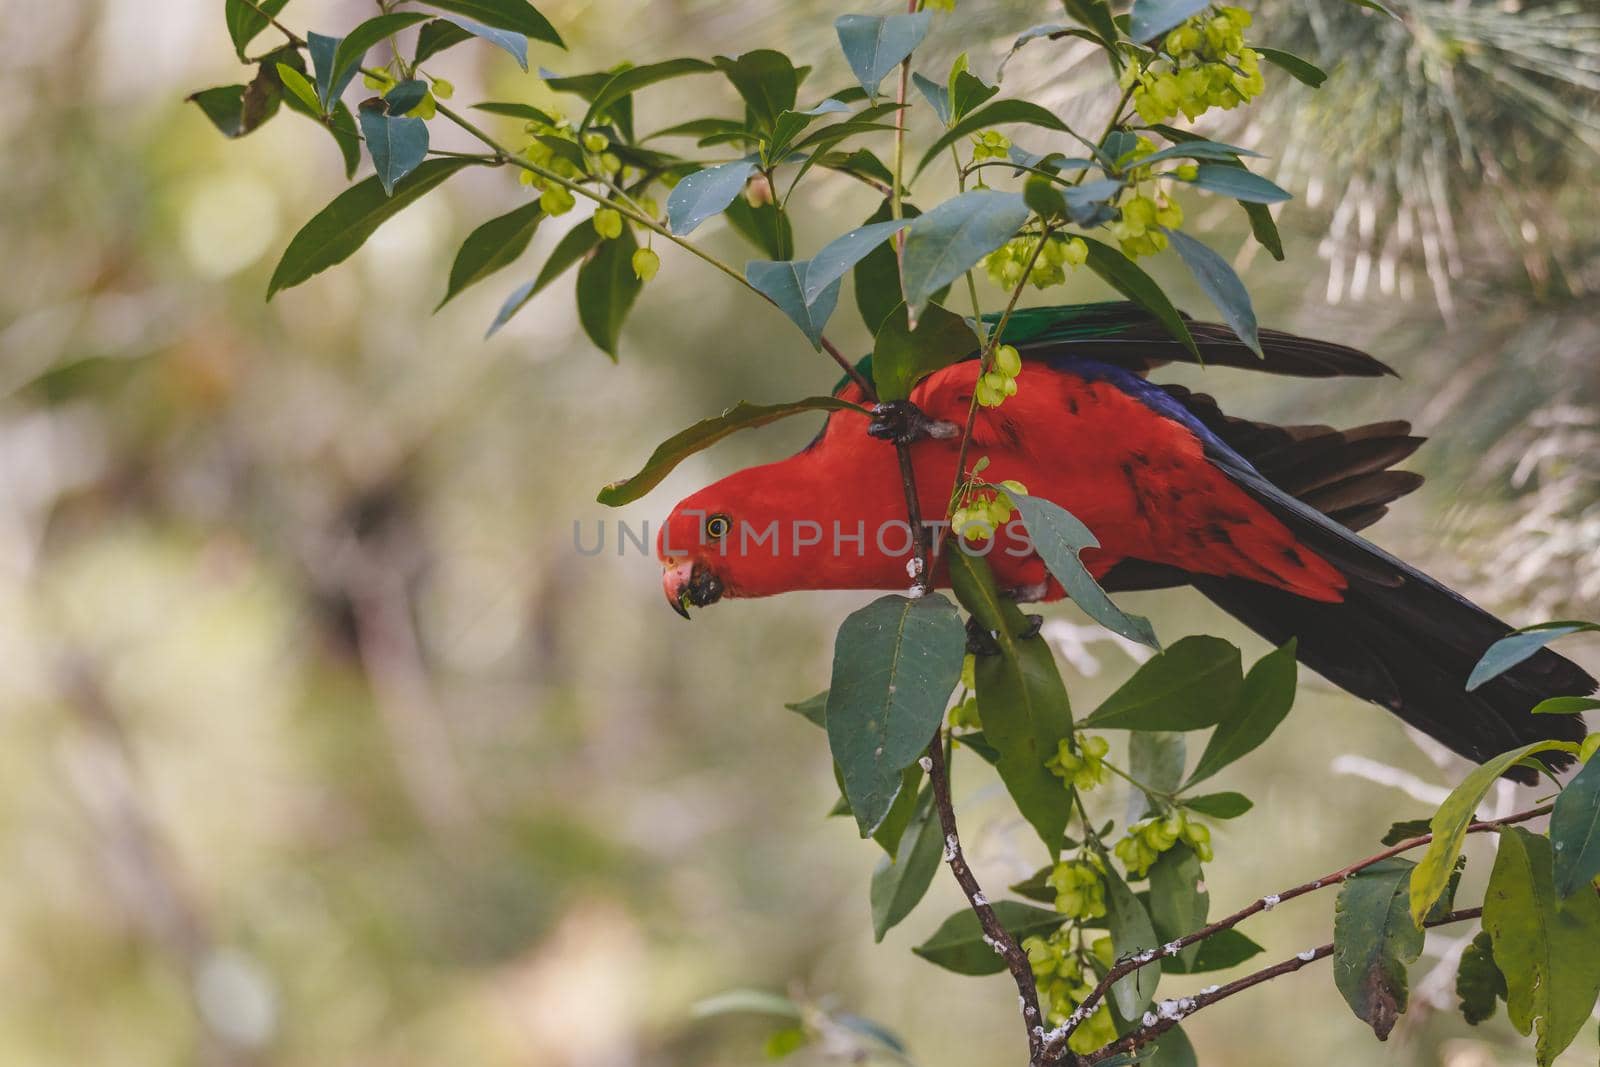 Australian King Parrot in a tree. High quality photo